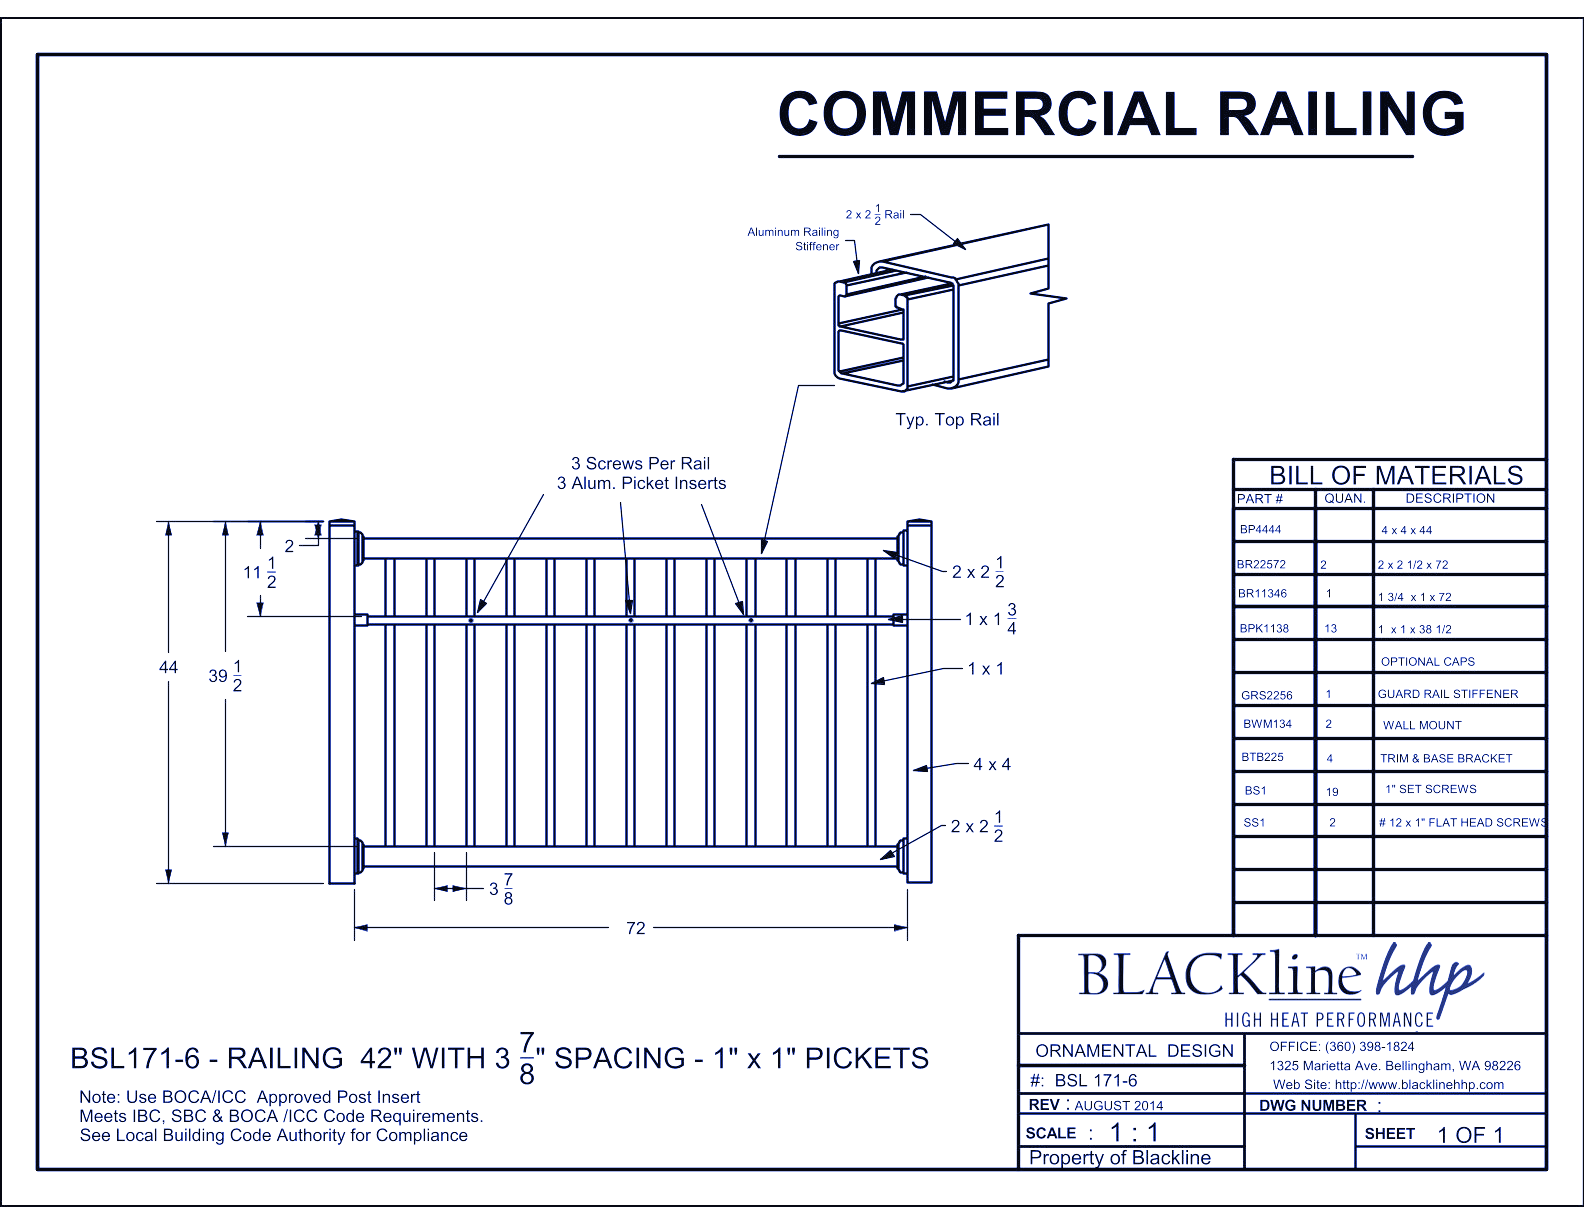 BSL171-6: Railing 42" with 3 7/8" Spacing - 1" x 1" Pickets